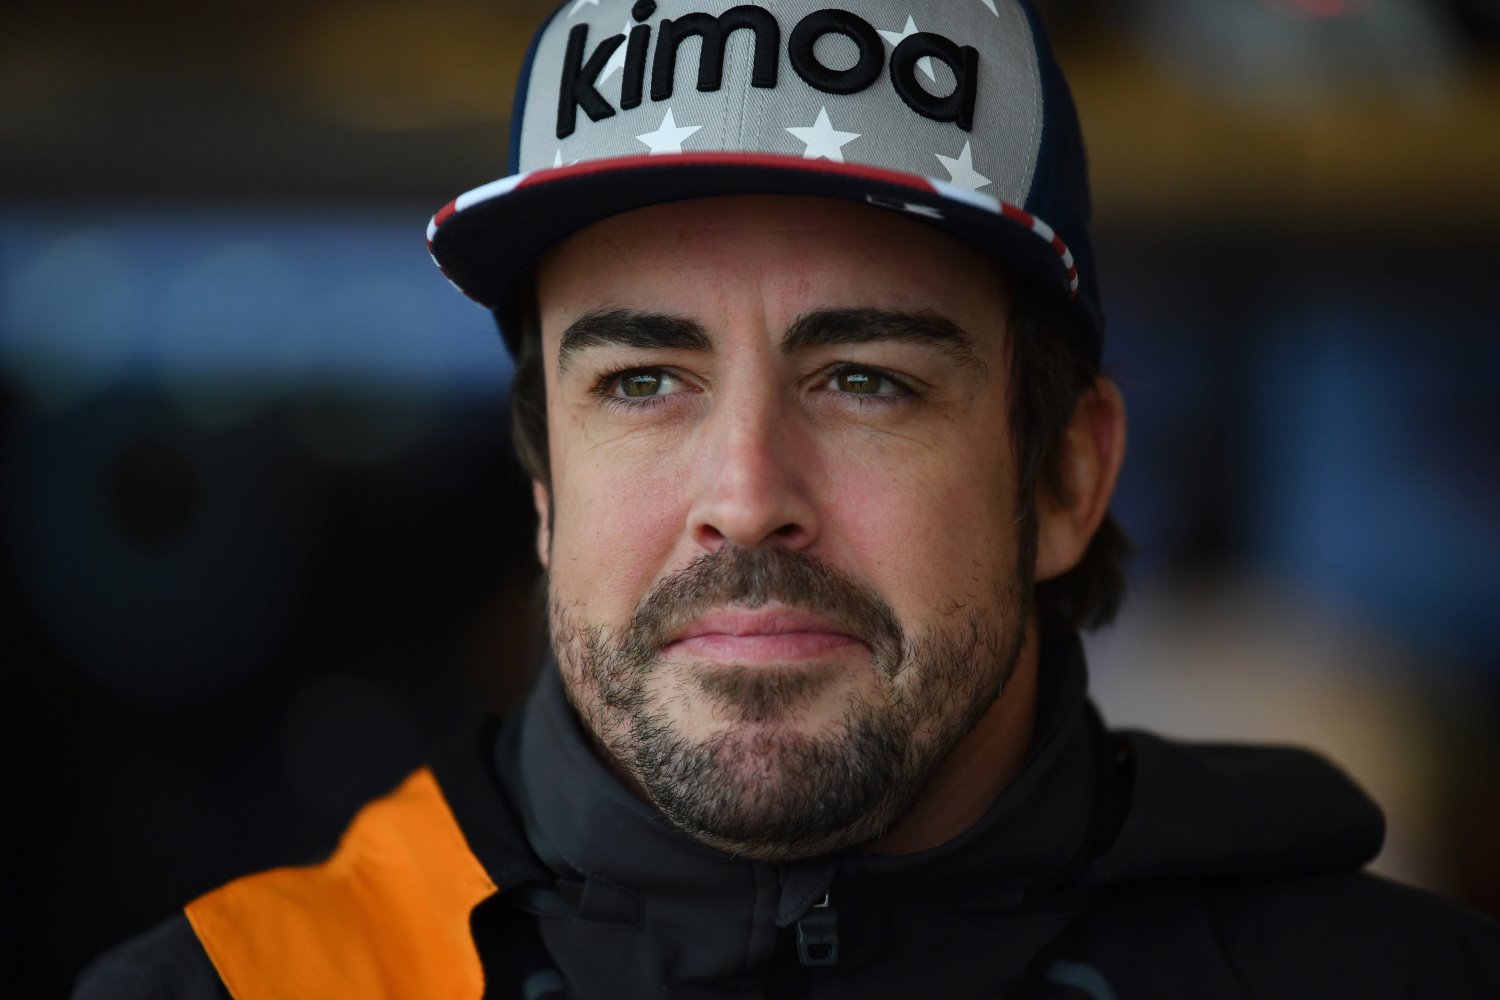 Honda gives it right back to Alonso who is now home tending to his garden